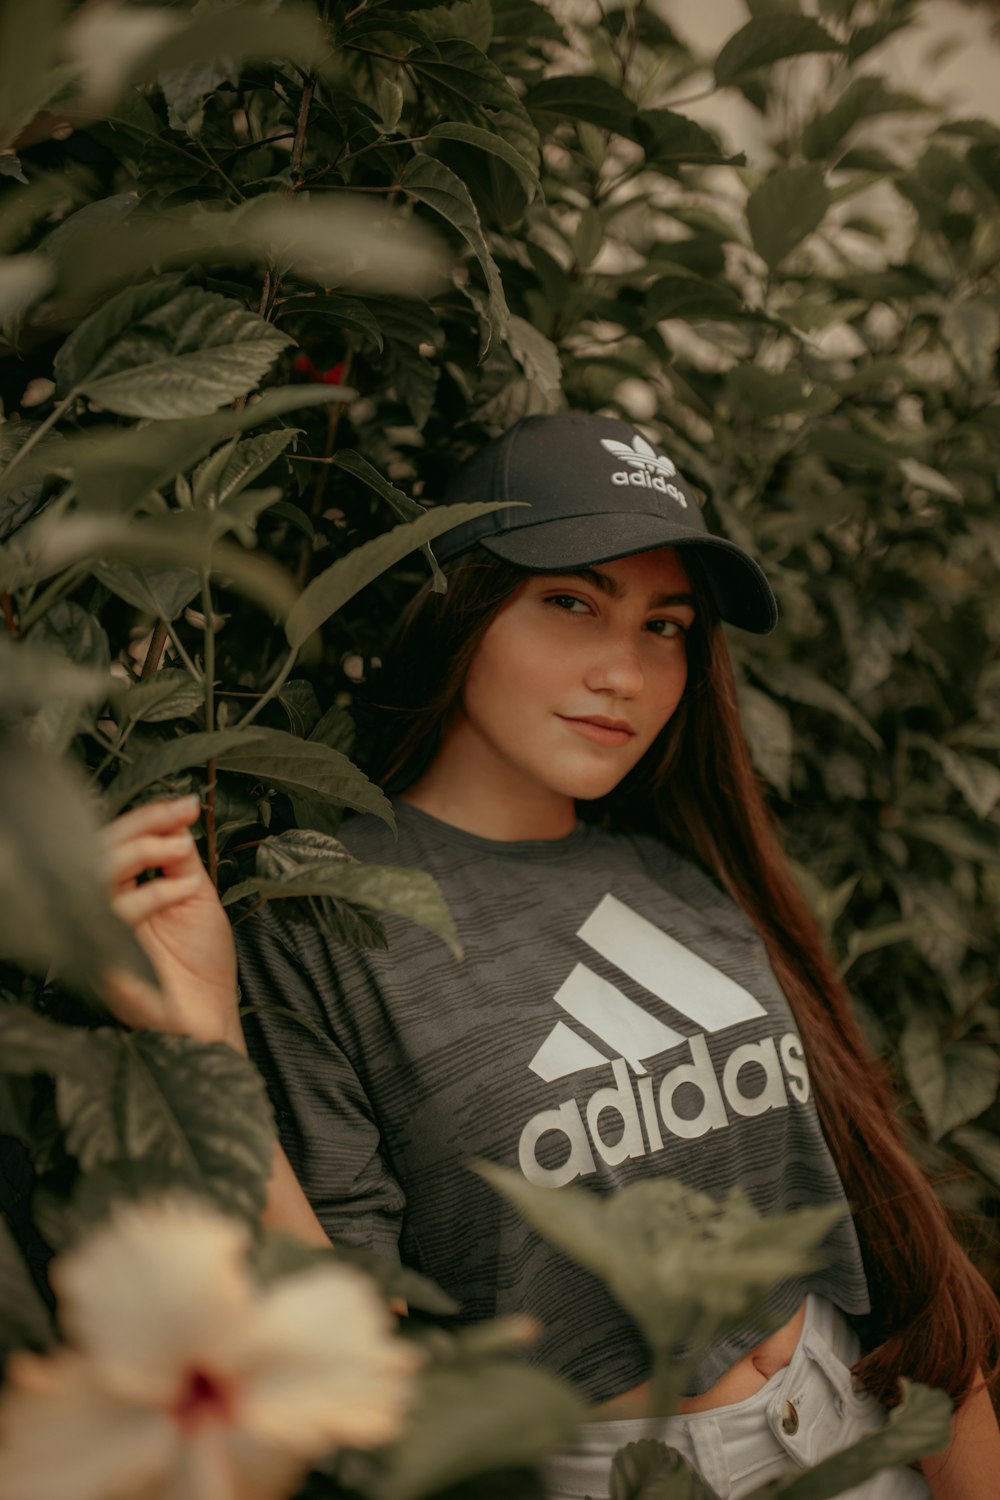 Woman in gray adidas shirt and cap leaning on green plants photo – Free  Clothing Image on Unsplash